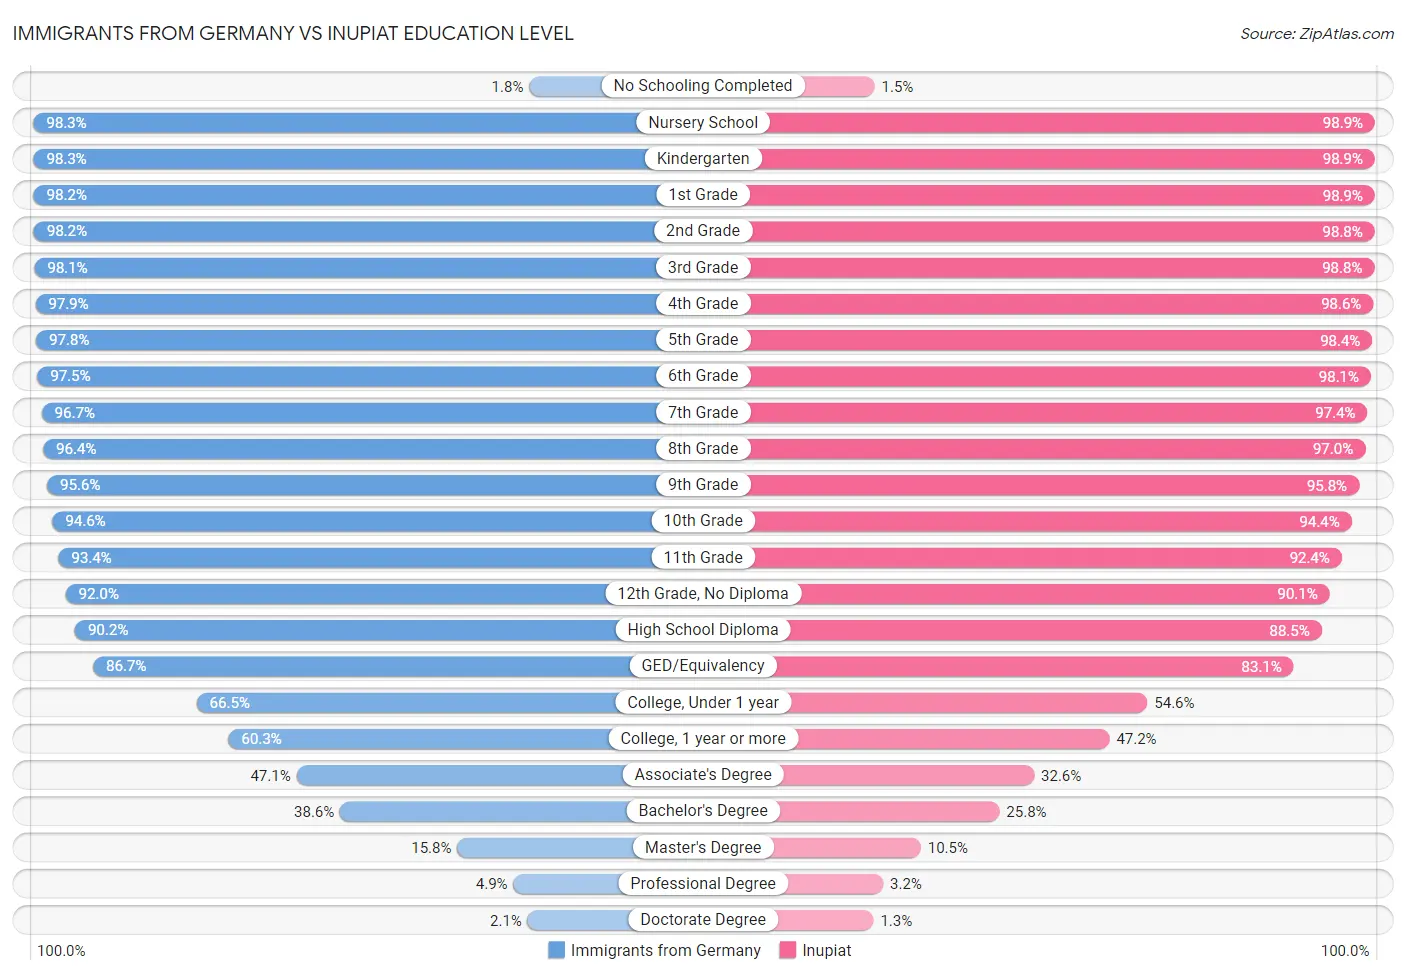 Immigrants from Germany vs Inupiat Education Level